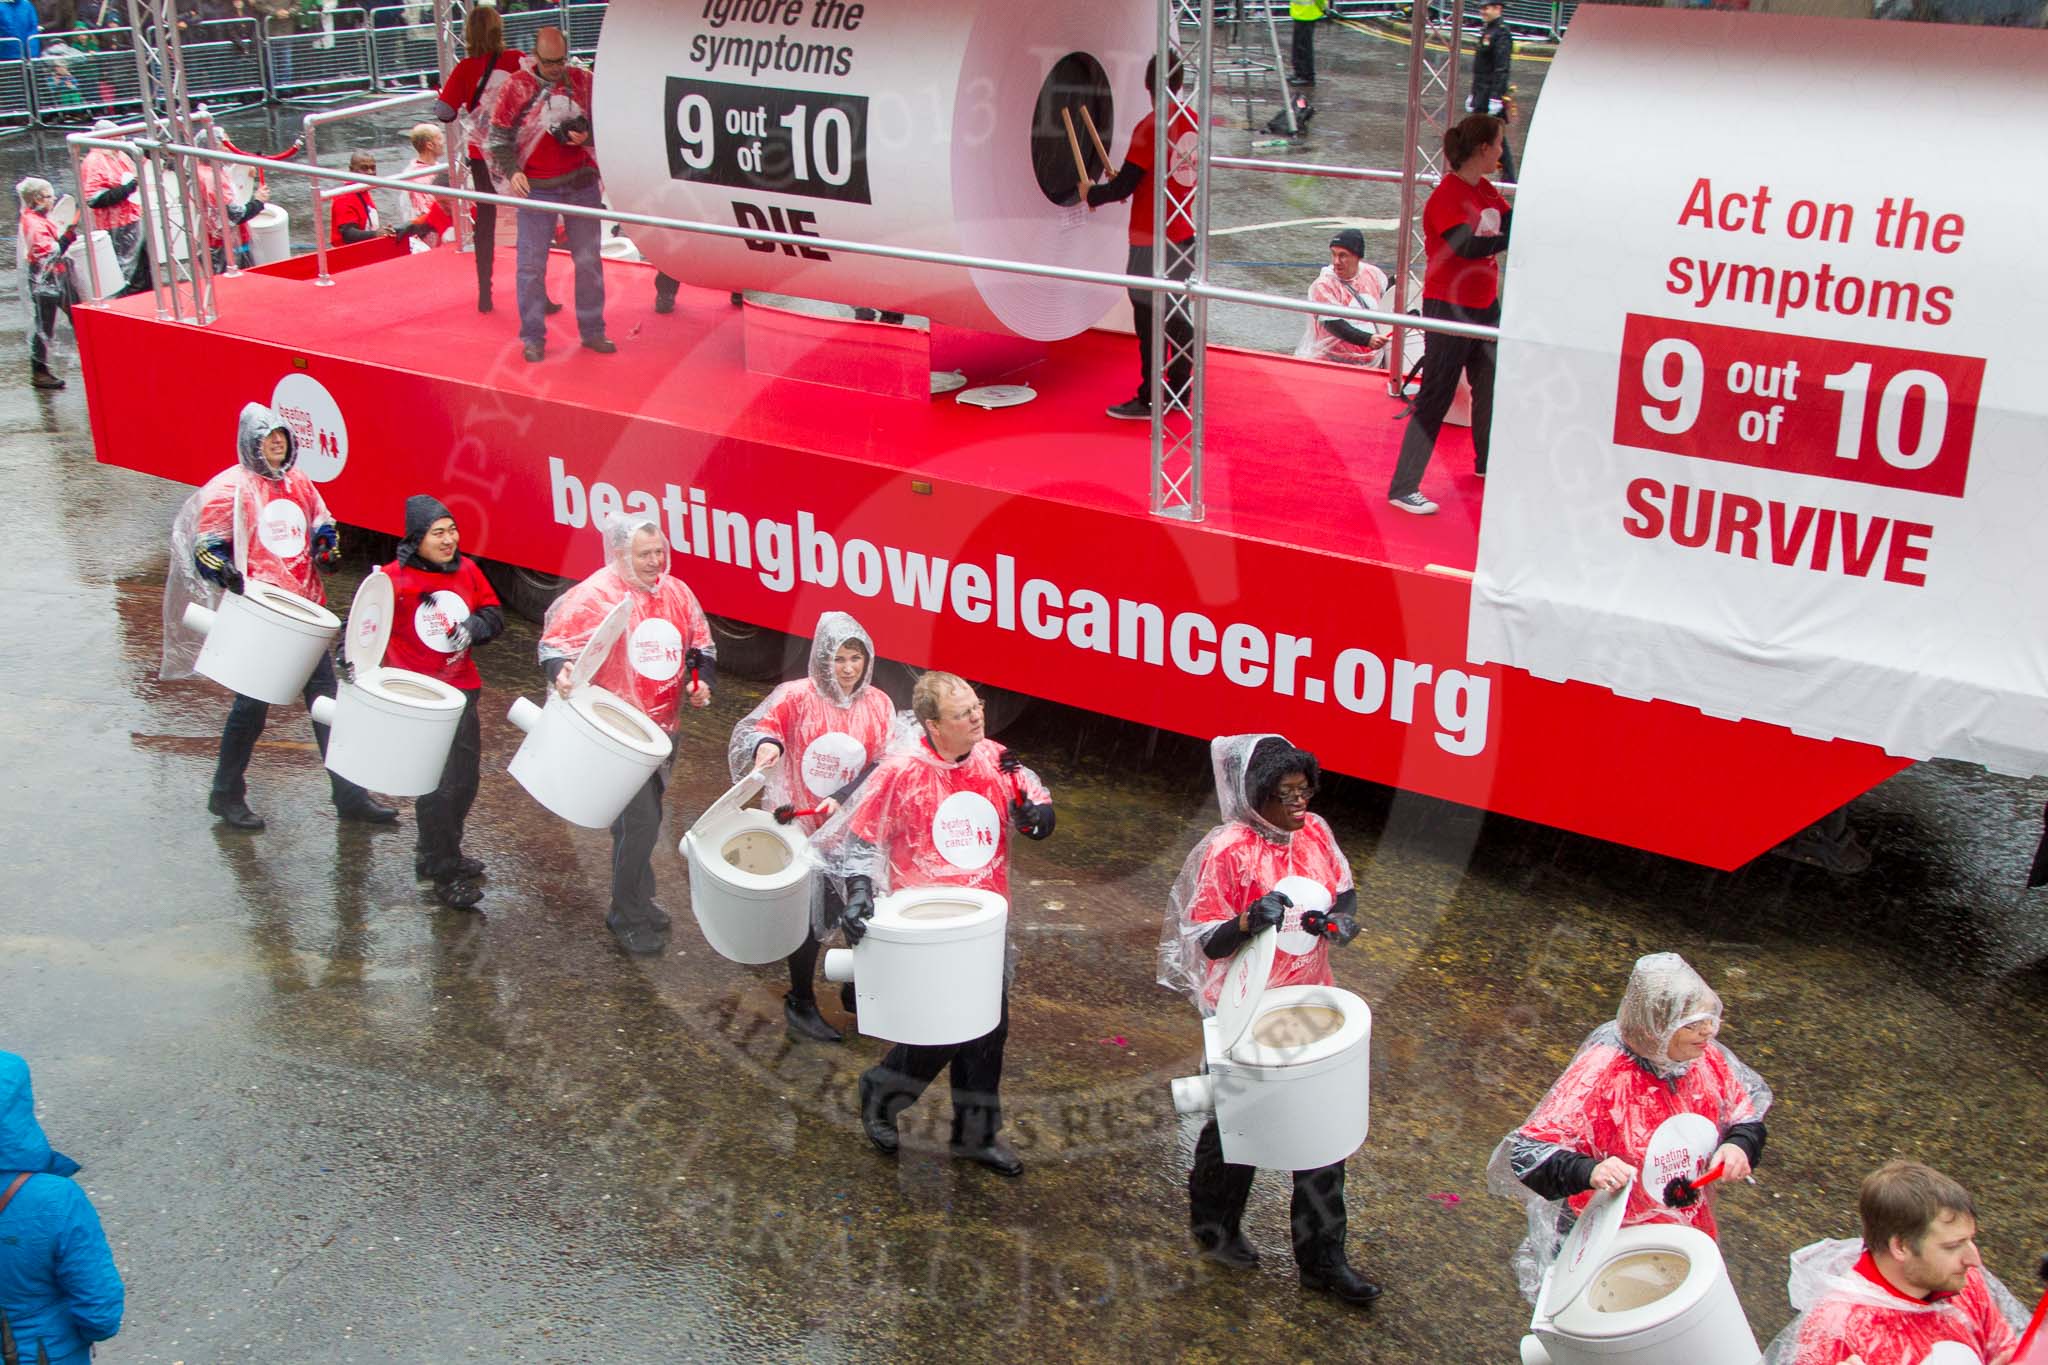 Lord Mayor's Show 2013: 50-Beating Bowel Cancer-are here to raise awareness and promote early diagnosis..
Press stand opposite Mansion House, City of London,
London,
Greater London,
United Kingdom,
on 09 November 2013 at 11:28, image #663